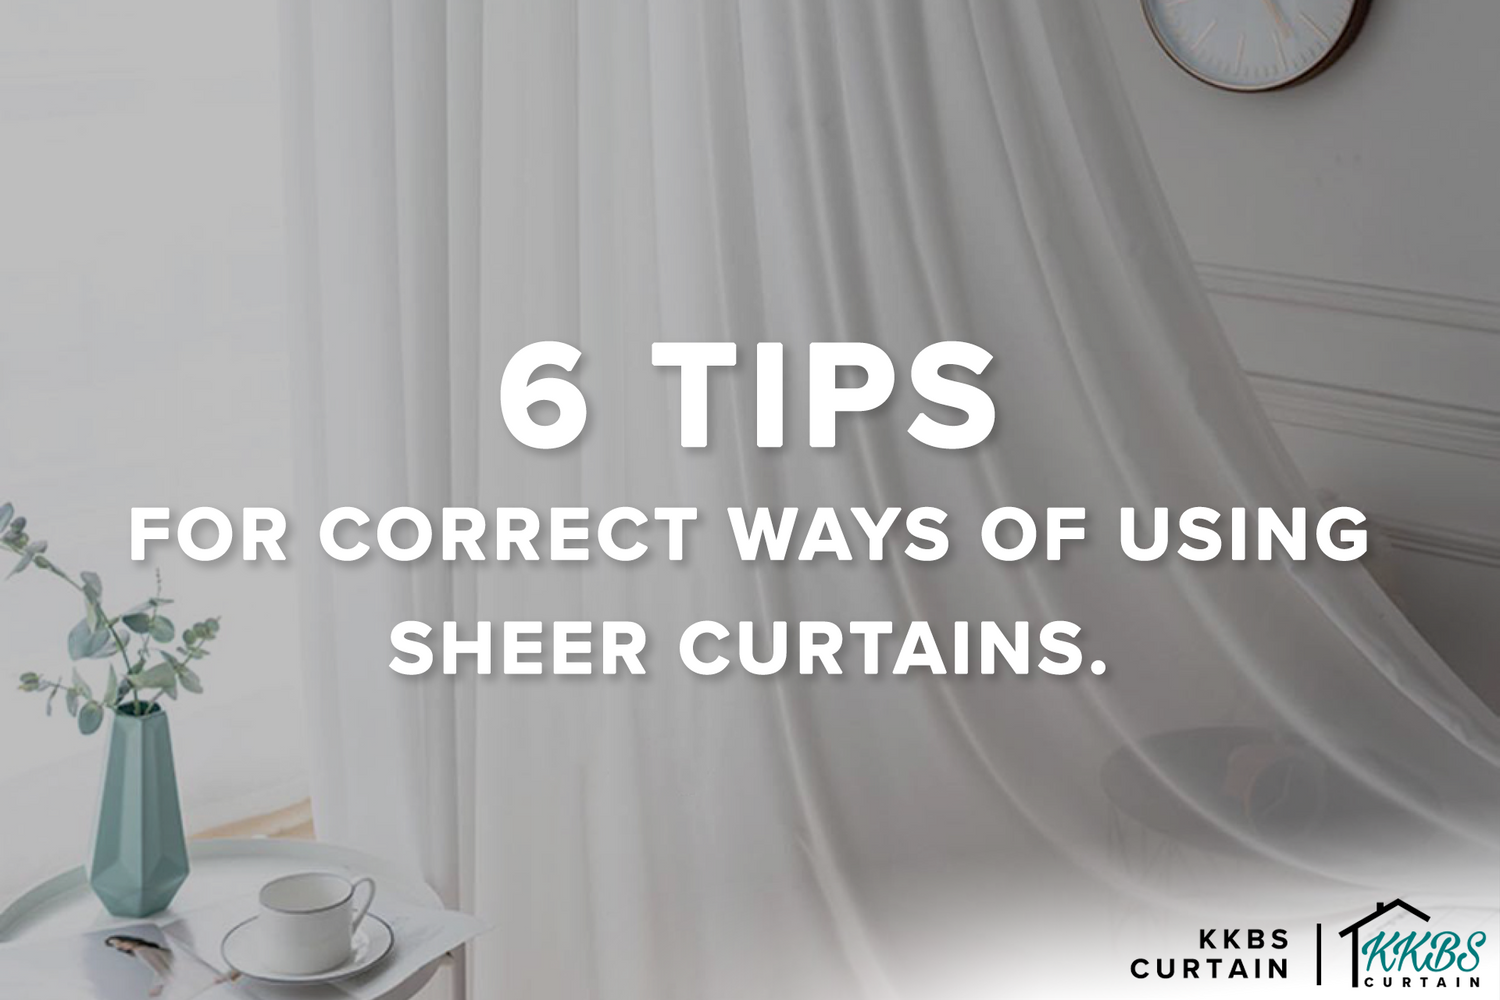 6 Tips for Correct Ways of Using Sheer Curtains